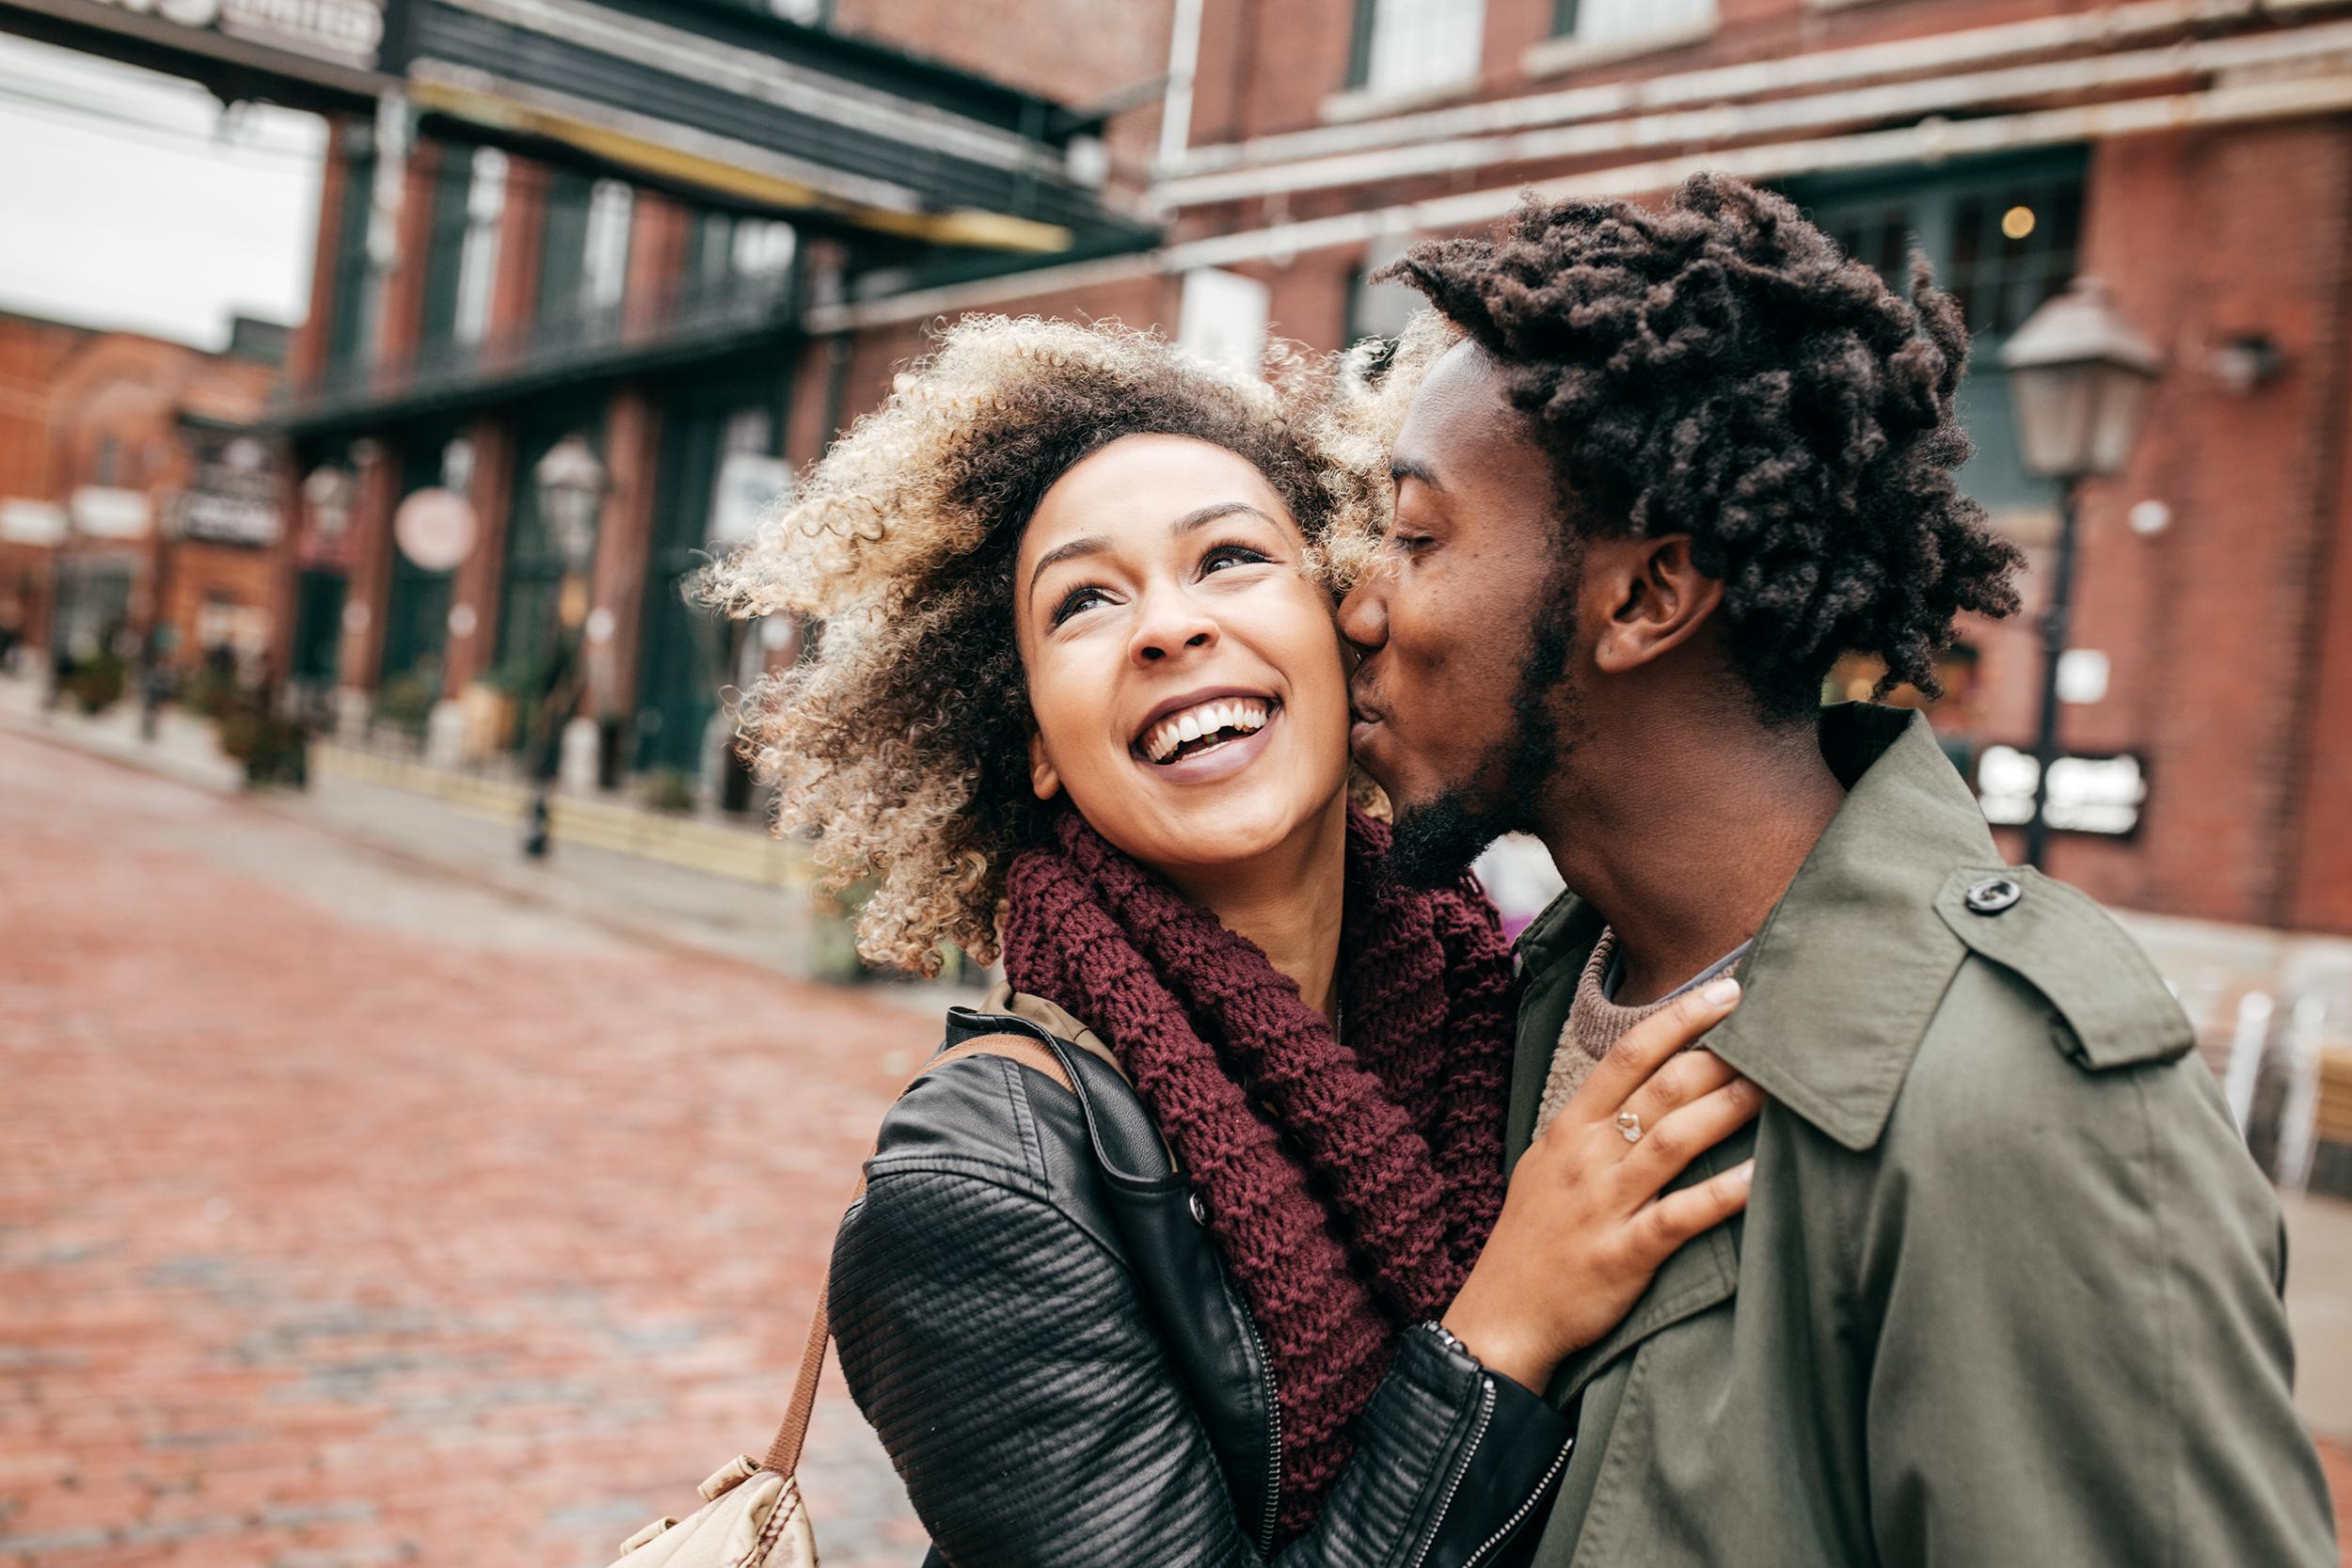 50 Questions to Increase Intimacy